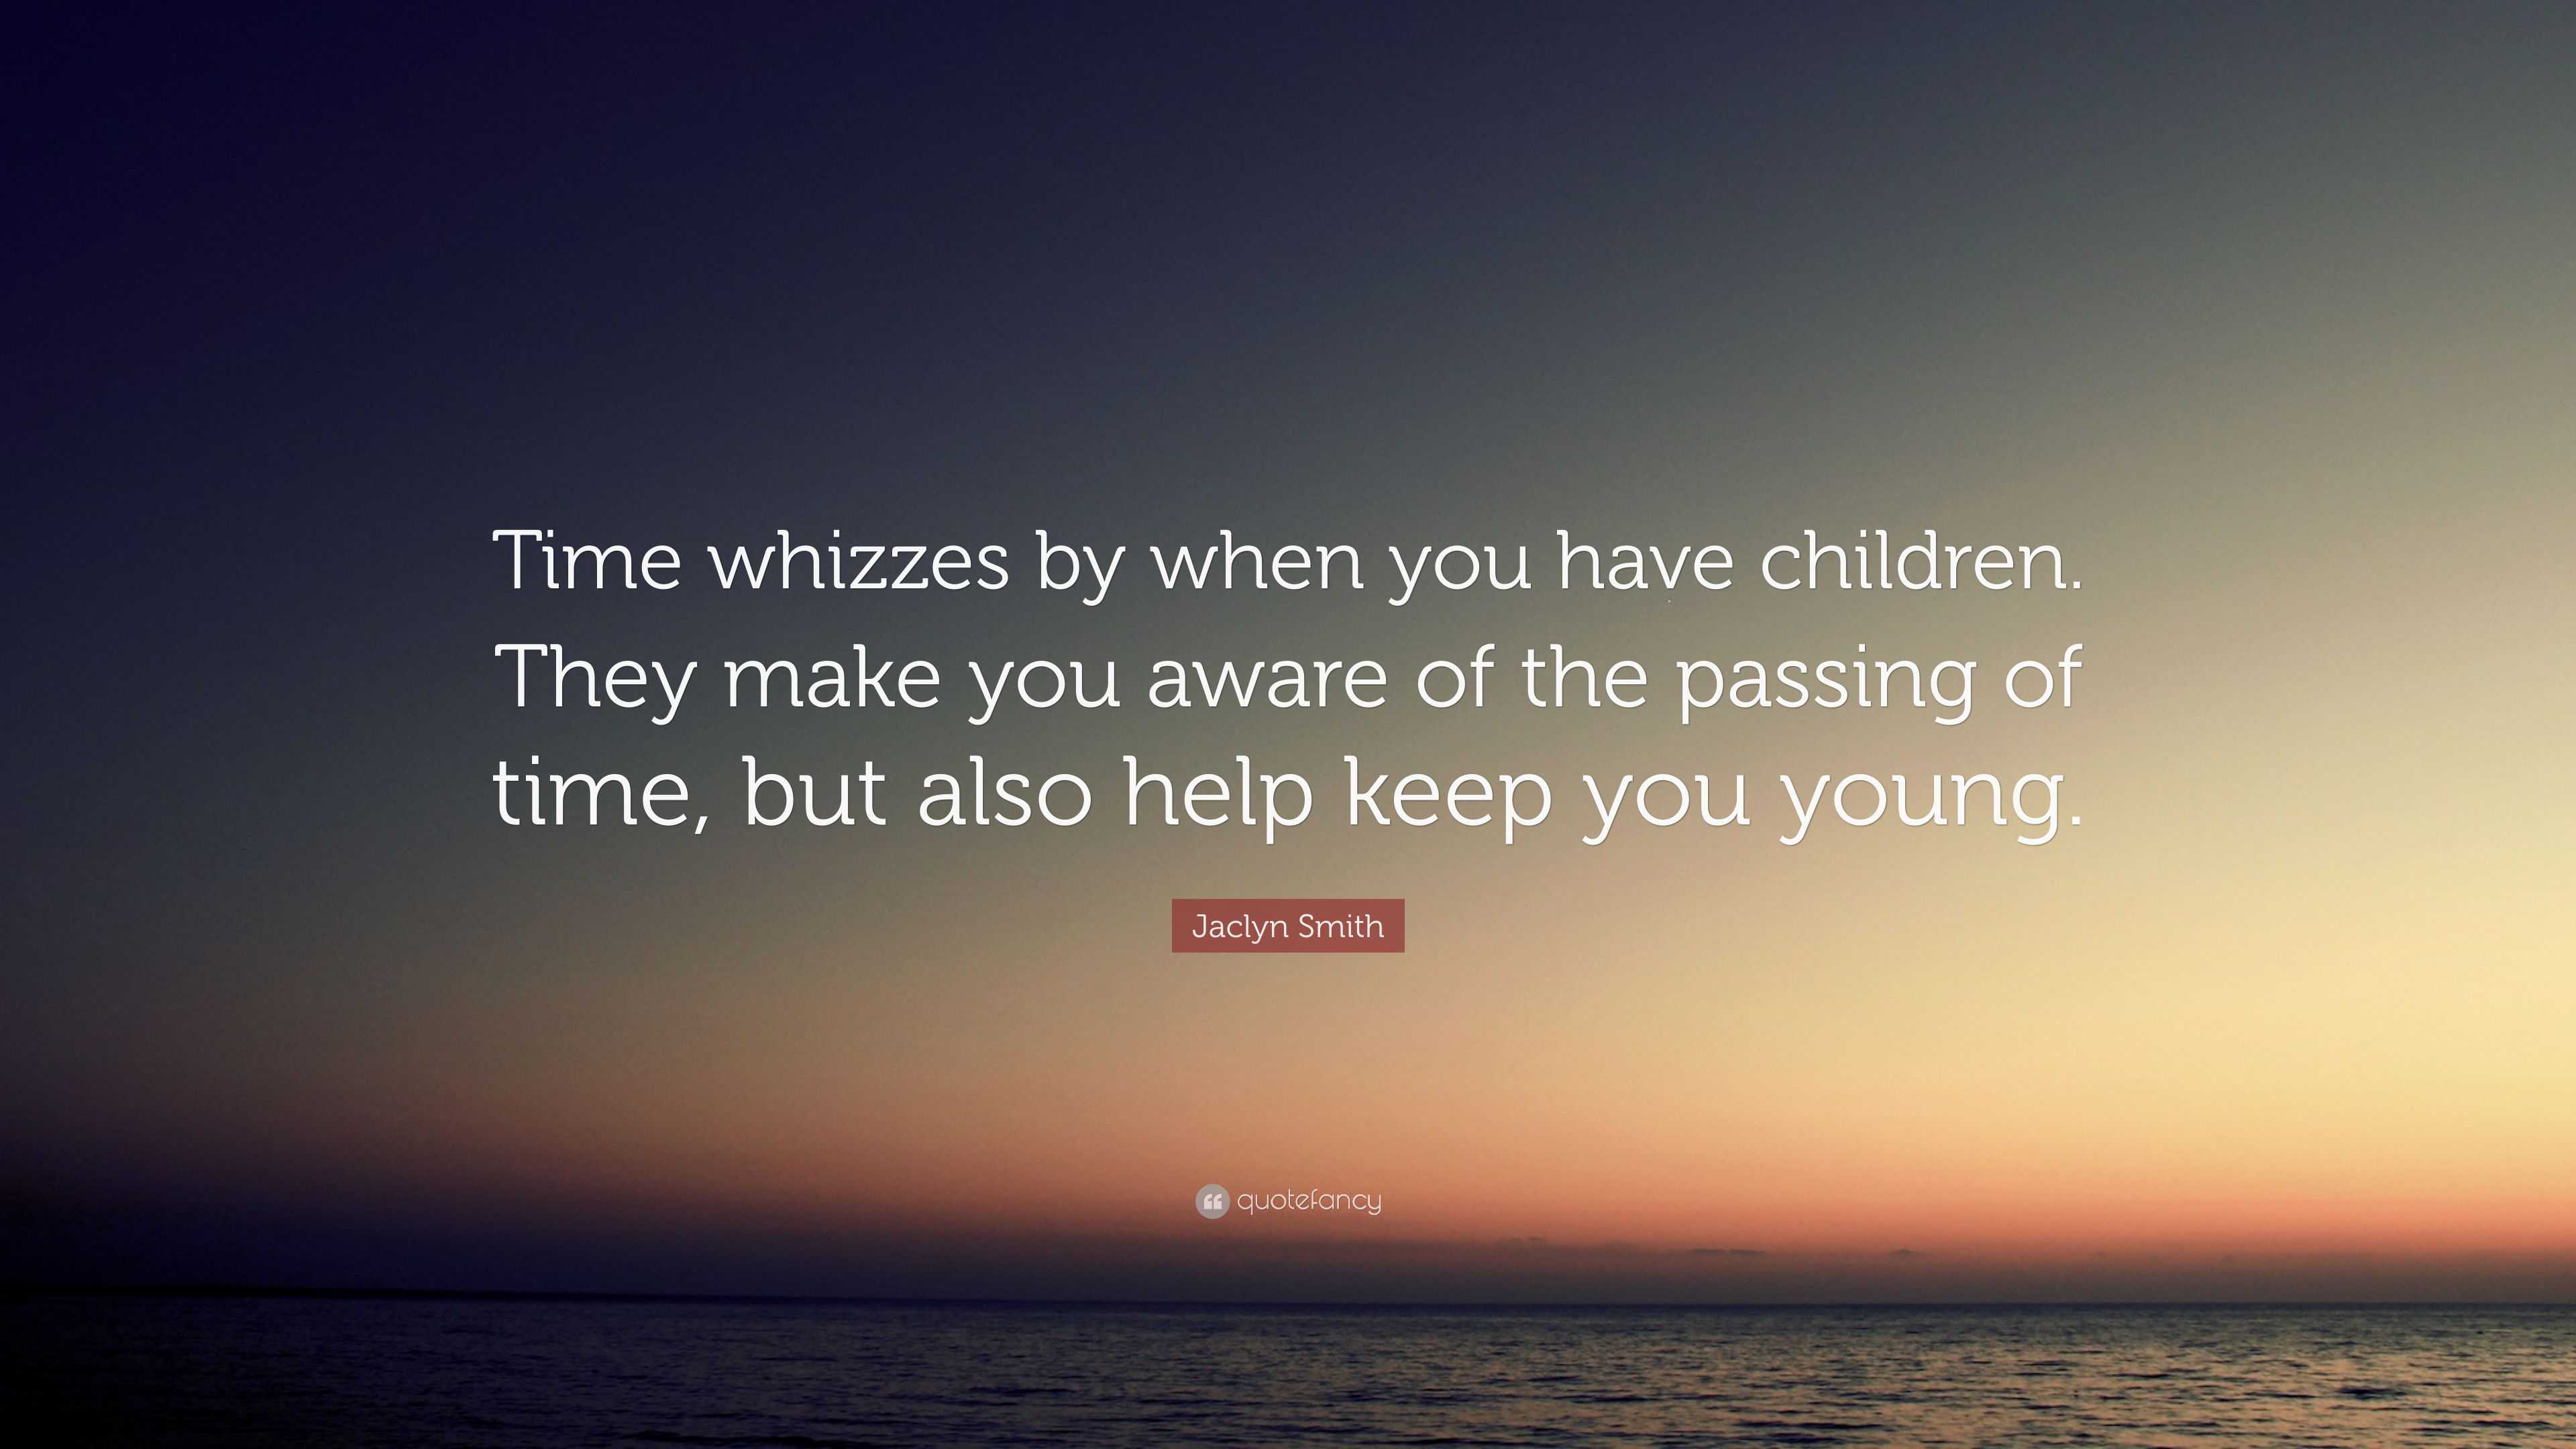 Jaclyn Smith Quote “Time whizzes by when you have children They make you